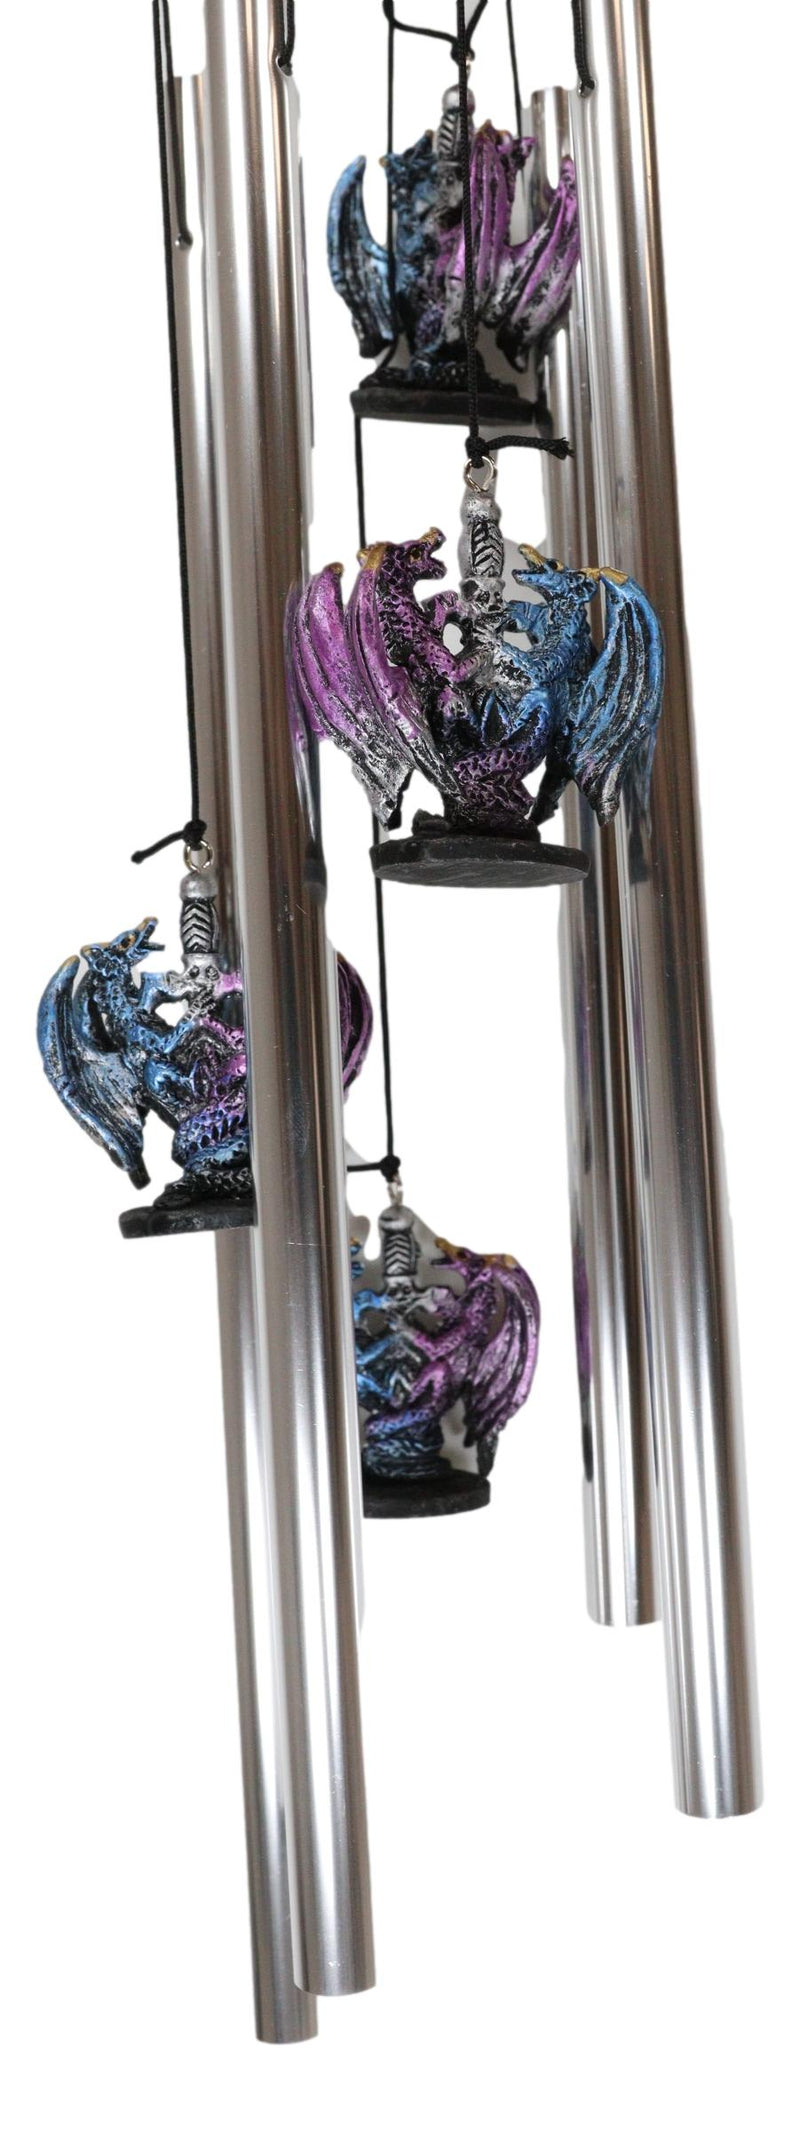 Yin Yang Day and Night Twin Dragons Excalibur Sword Wind Chime Home Patio Decor